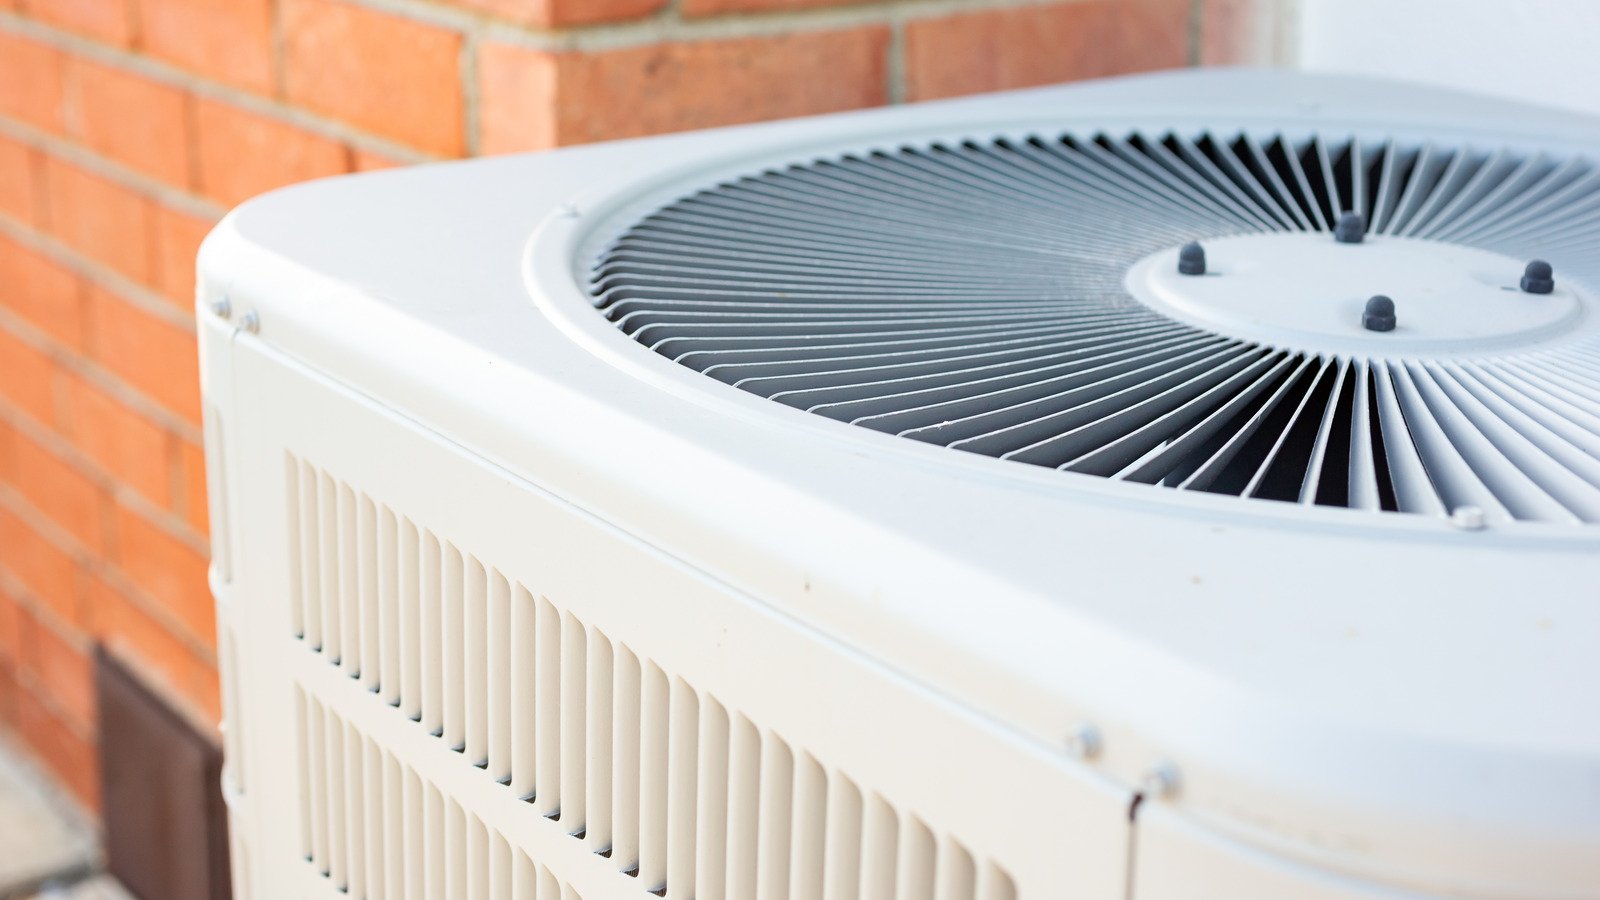 How To Care For Your Outdoor A/C Unit In The Winter, According To An Expert